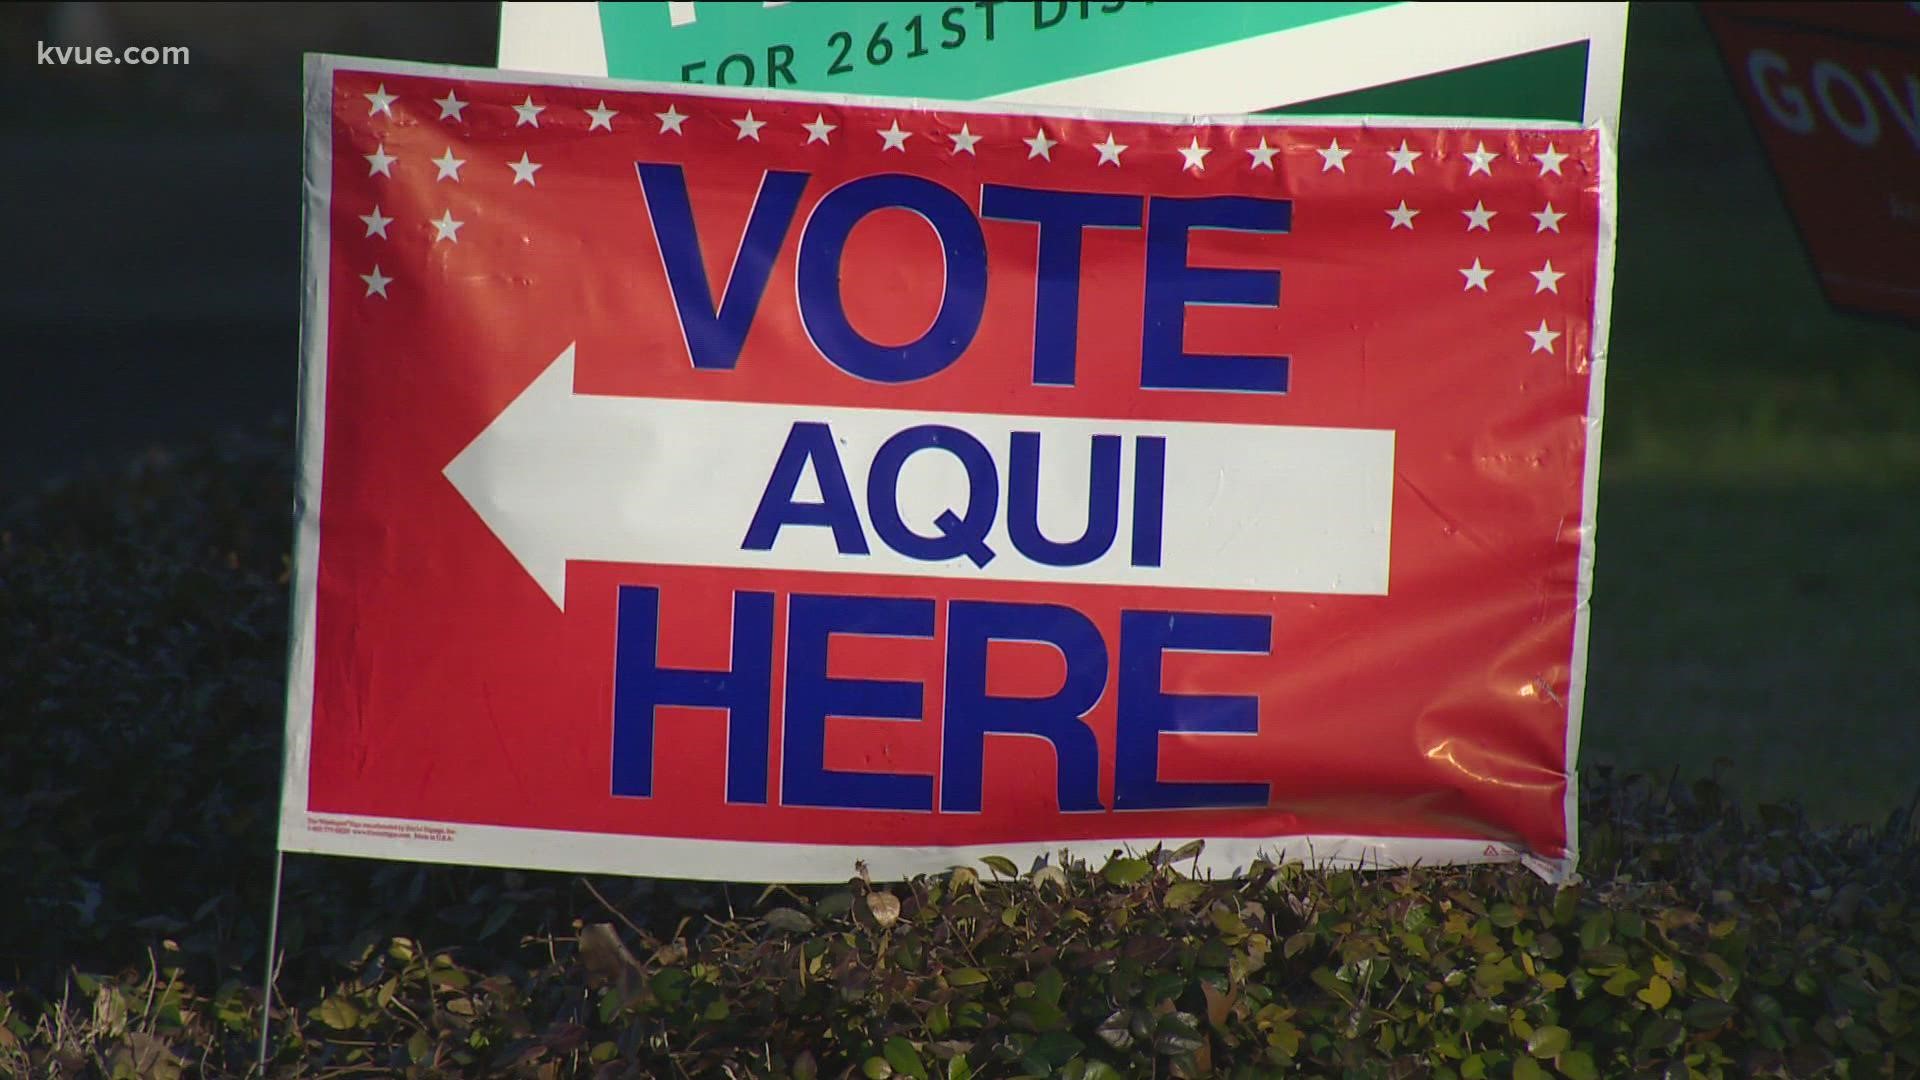 Texas voters will have the opportunity to weigh in on two proposed amendments to the Texas Constitution, as well as a number of local contests.